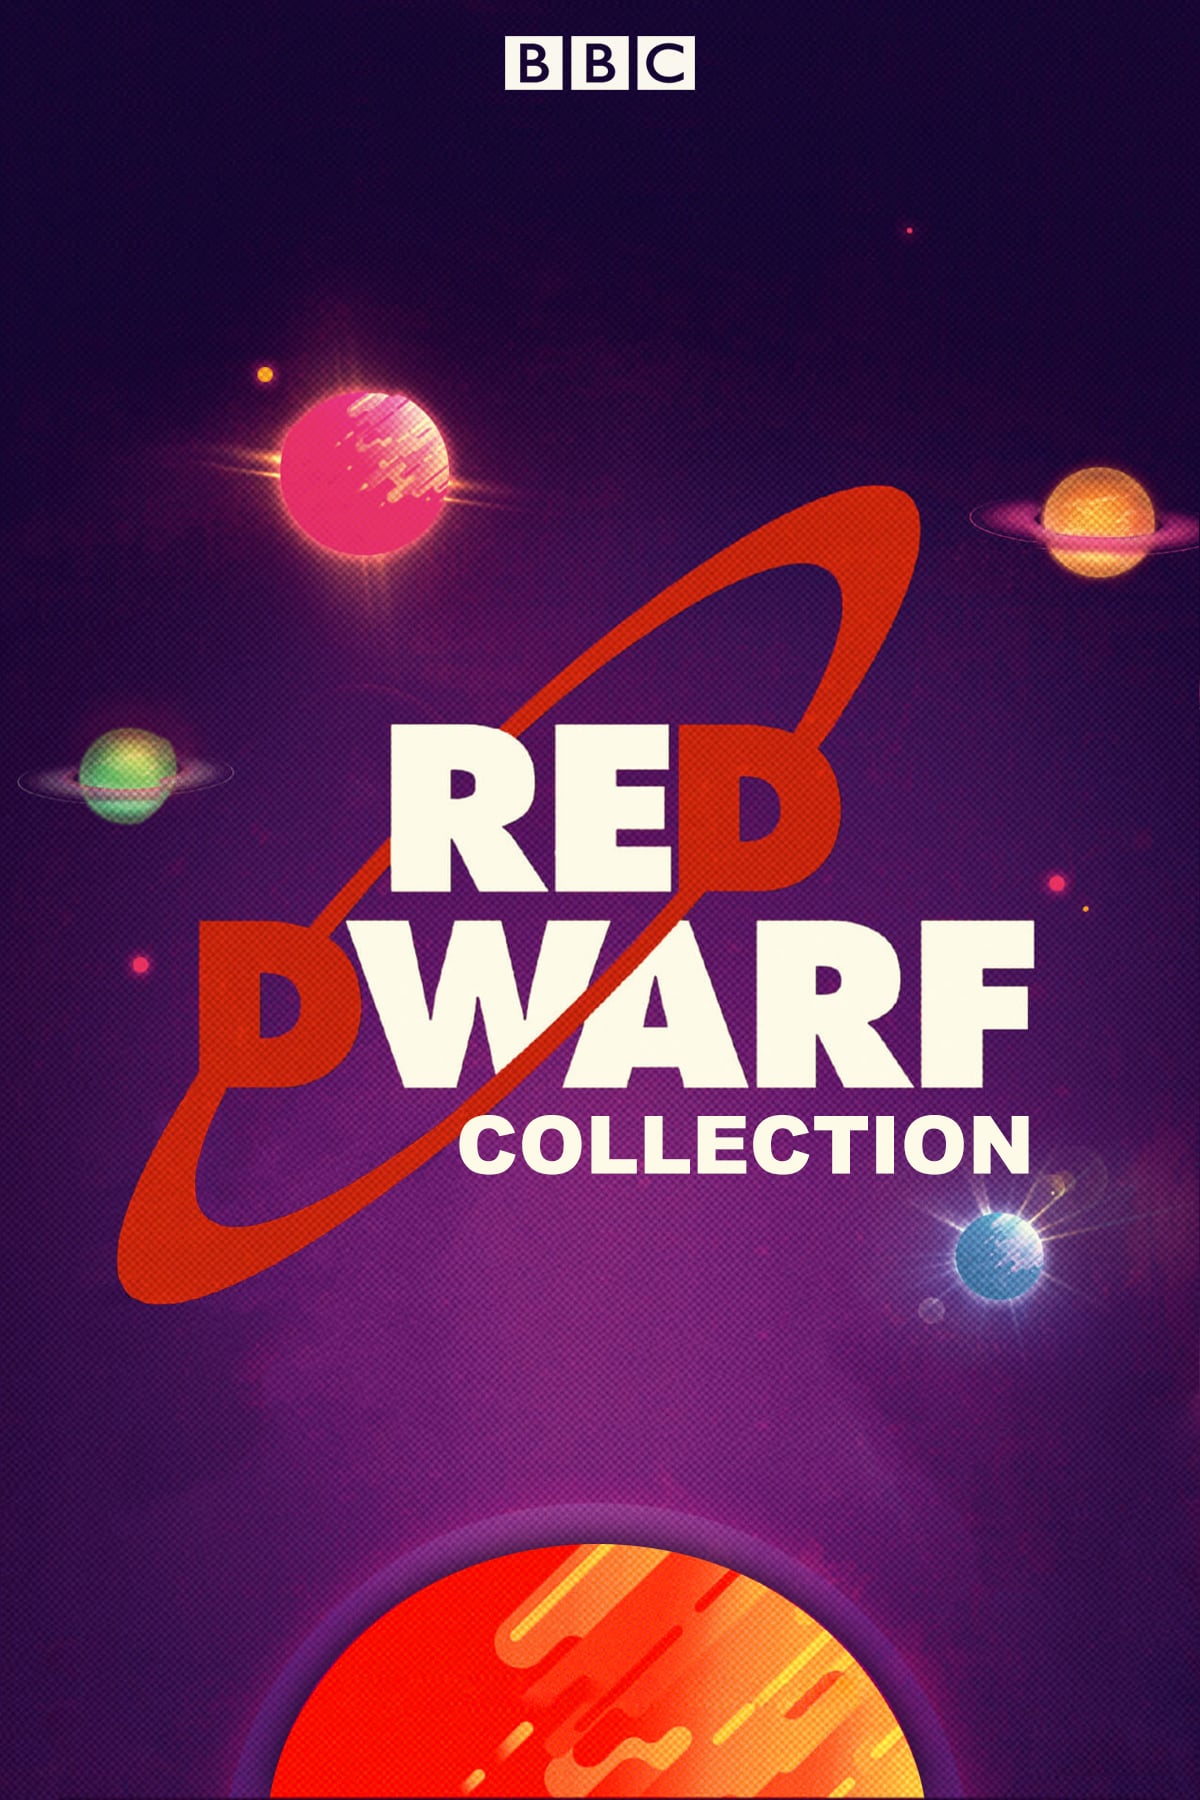 Red Dwarf Picture